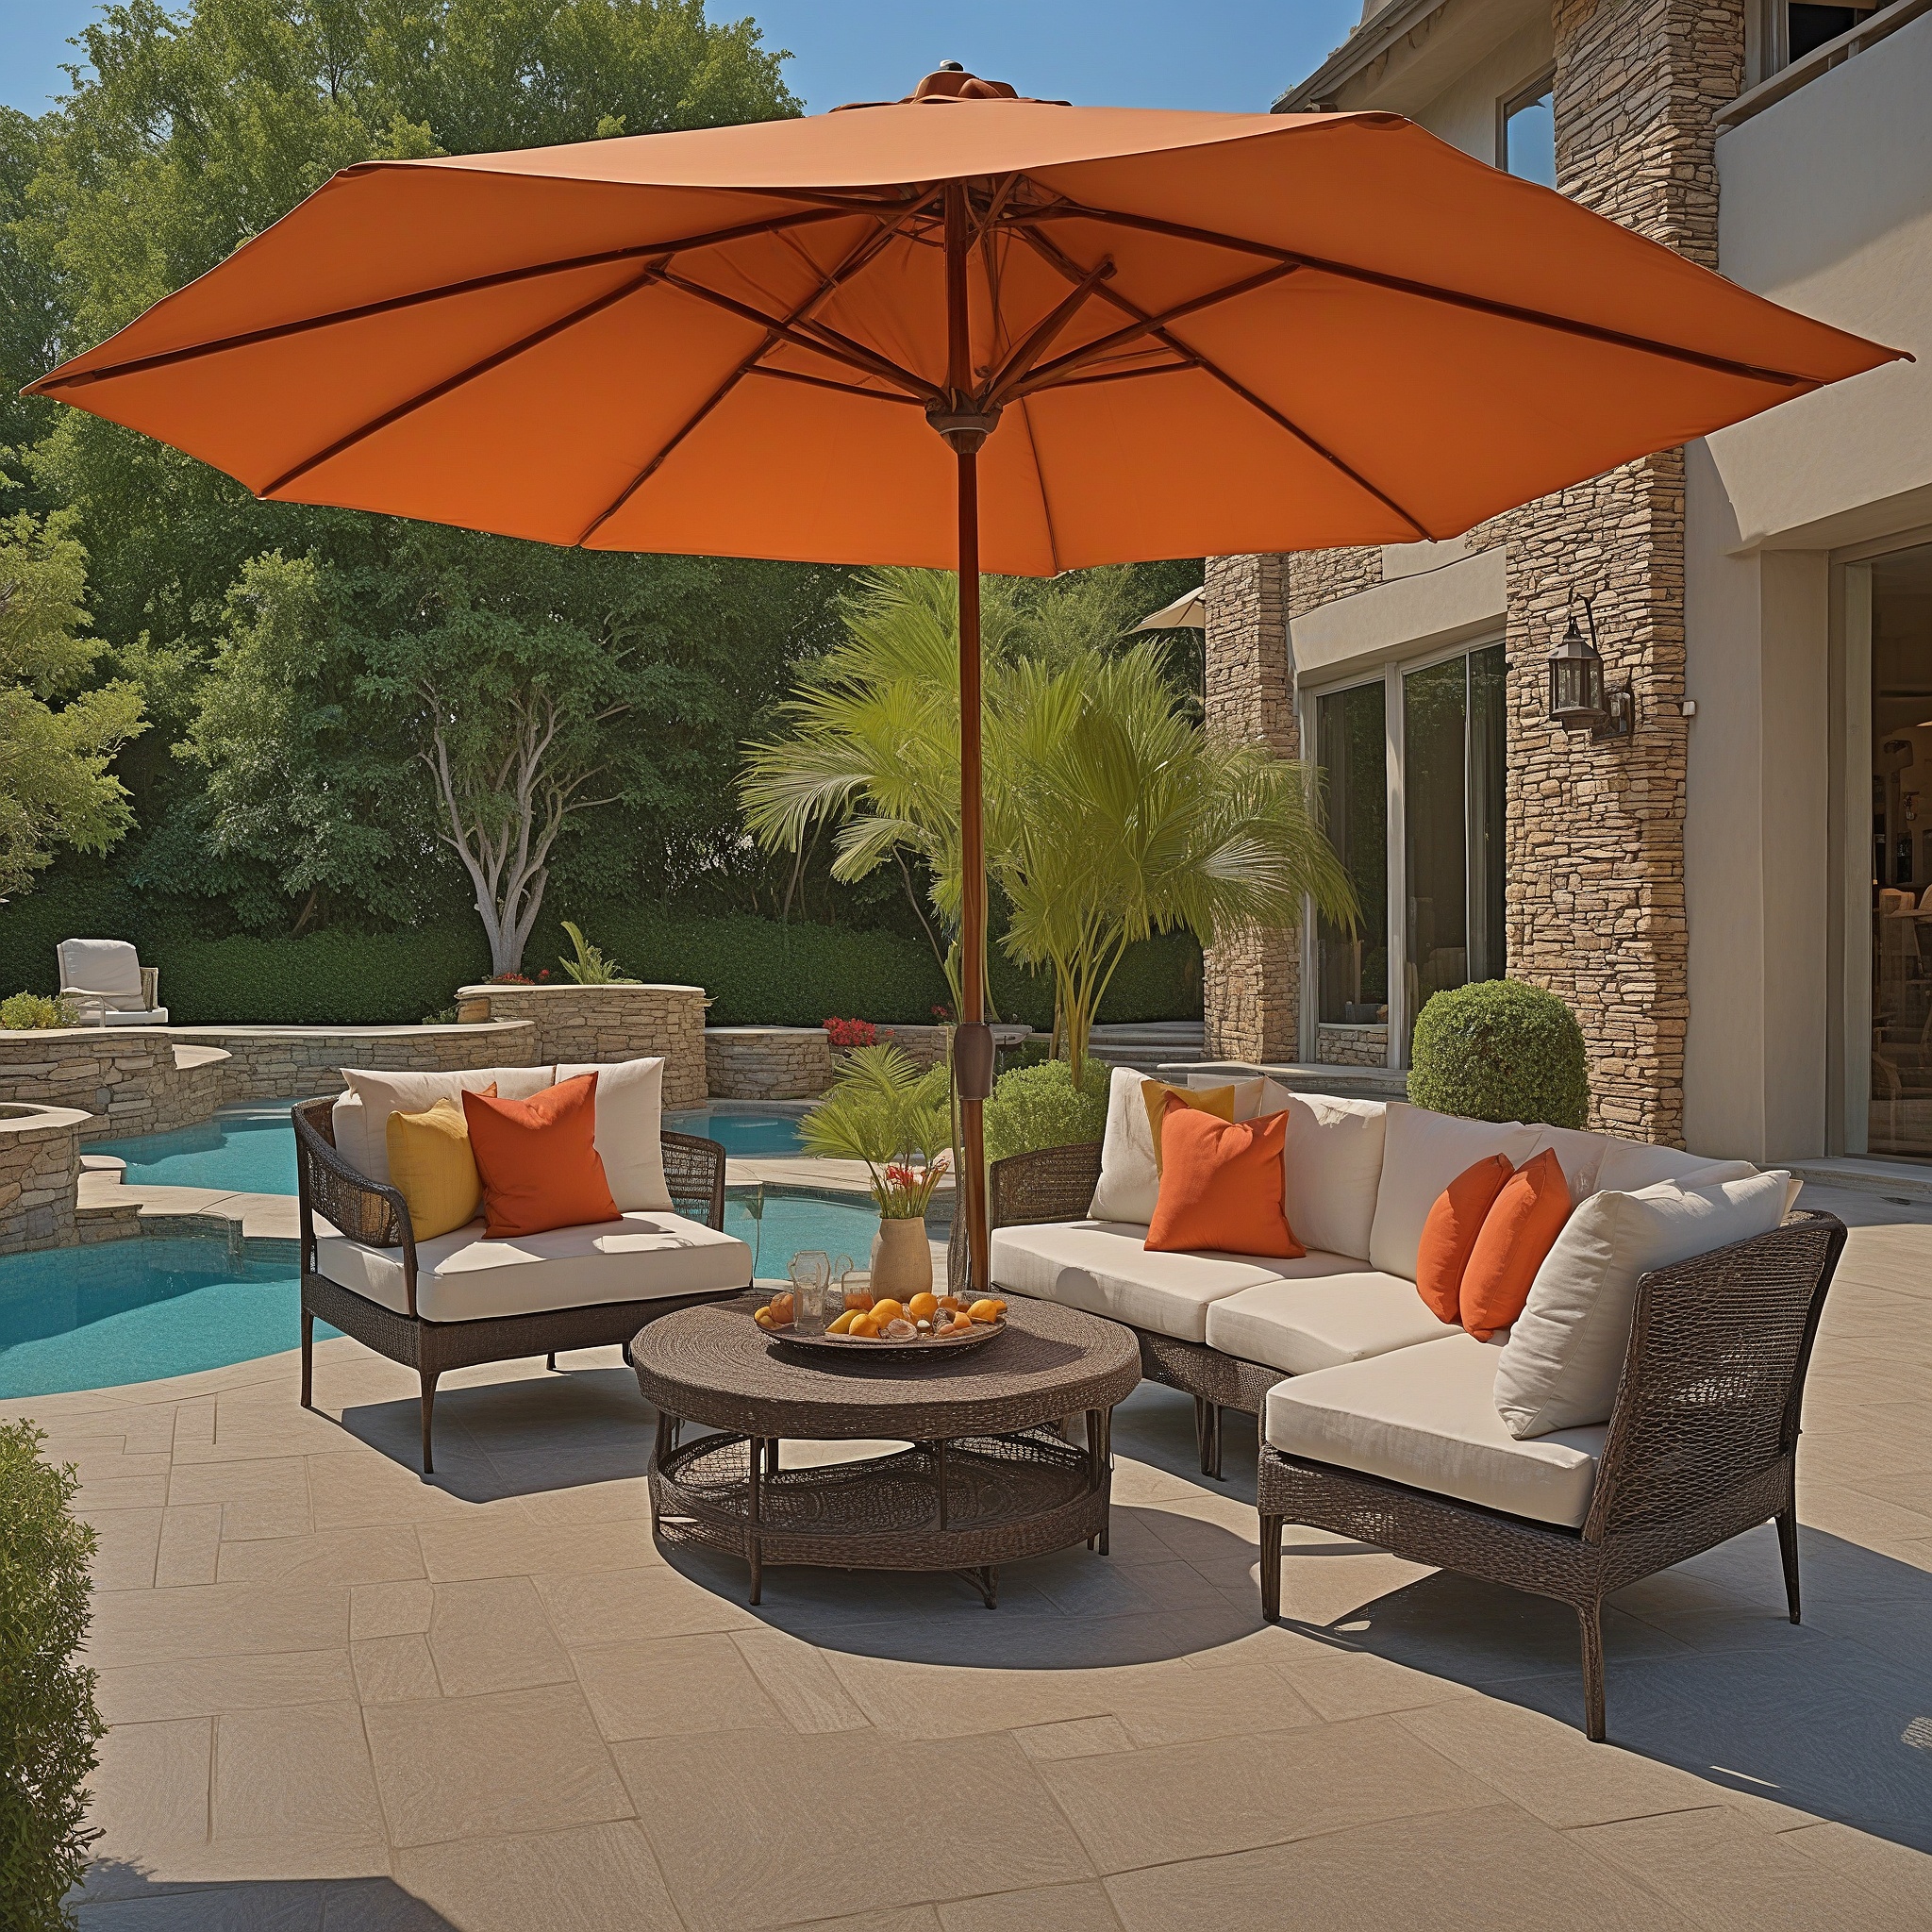 Backyard Patio With Comfortable Lounge Chairs And a Large Umbrella